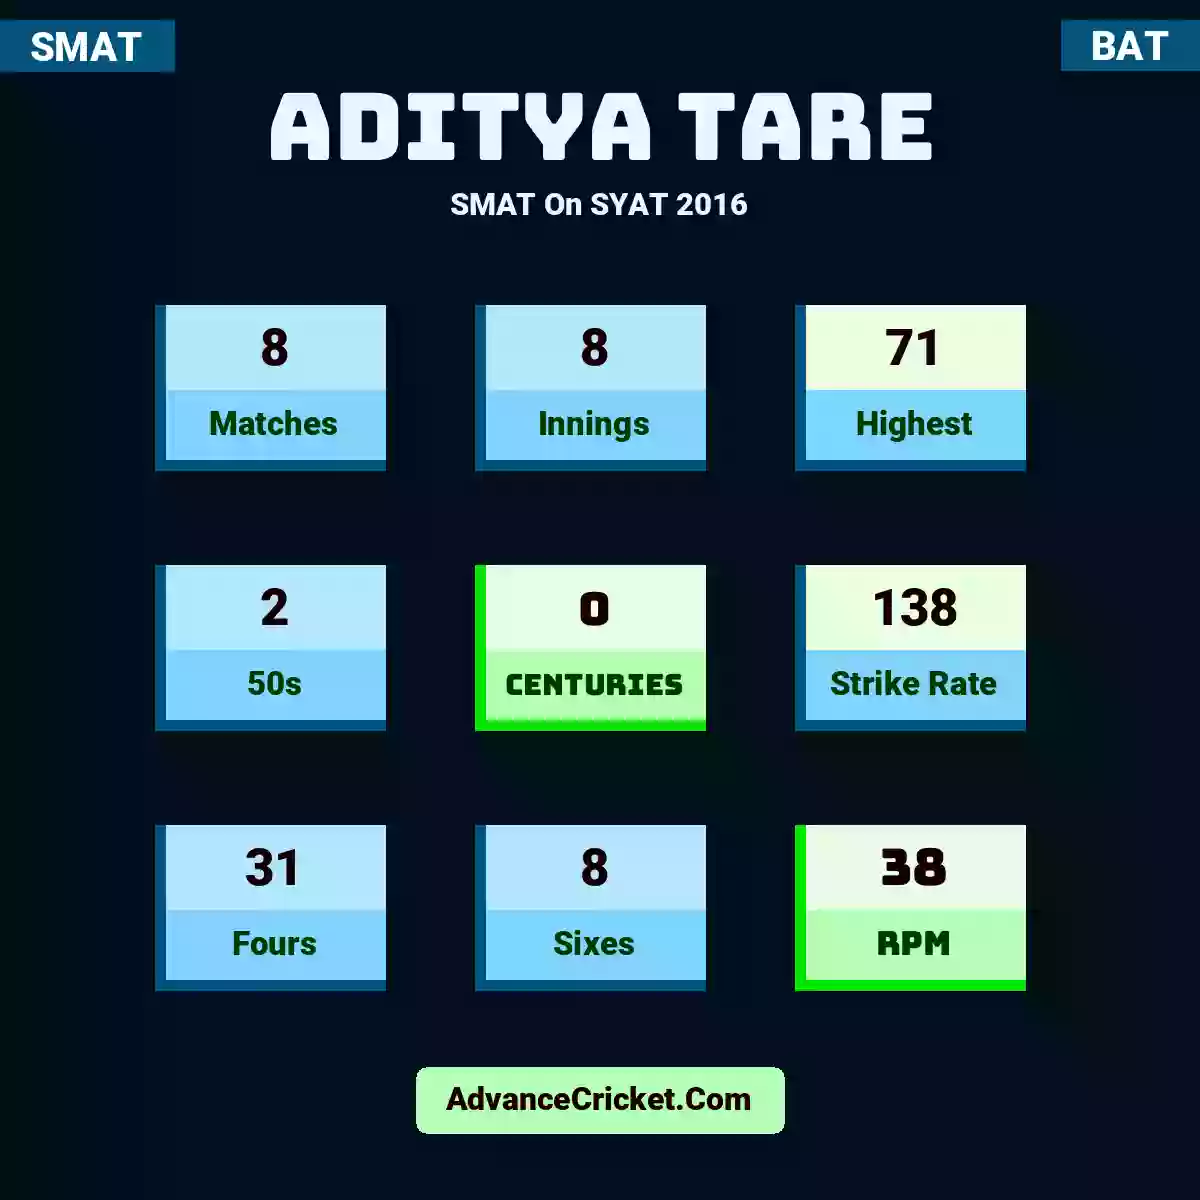 Aditya Tare SMAT  On SYAT 2016, Aditya Tare played 8 matches, scored 71 runs as highest, 2 half-centuries, and 0 centuries, with a strike rate of 138. A.Tare hit 31 fours and 8 sixes, with an RPM of 38.